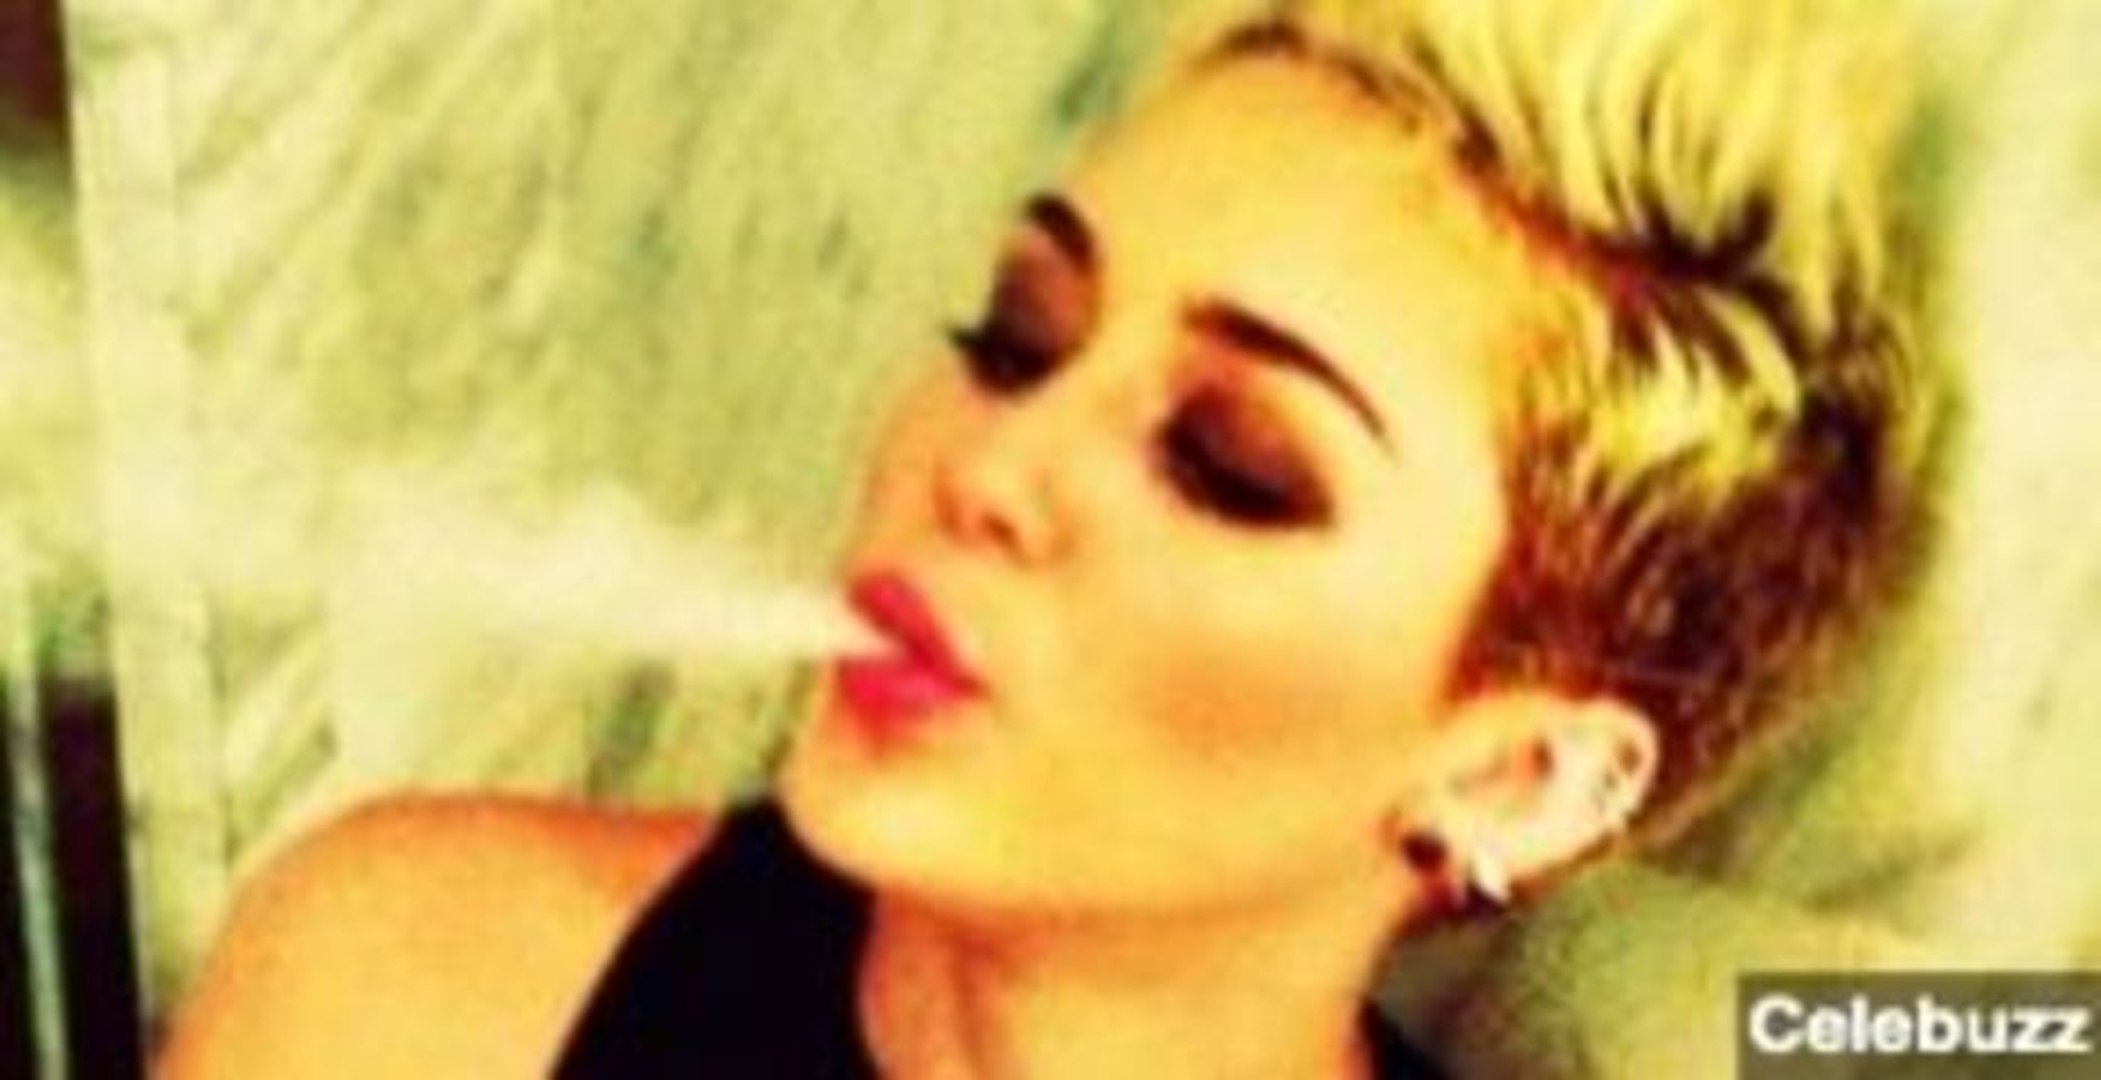 Is Miley's Engagement in Trouble?